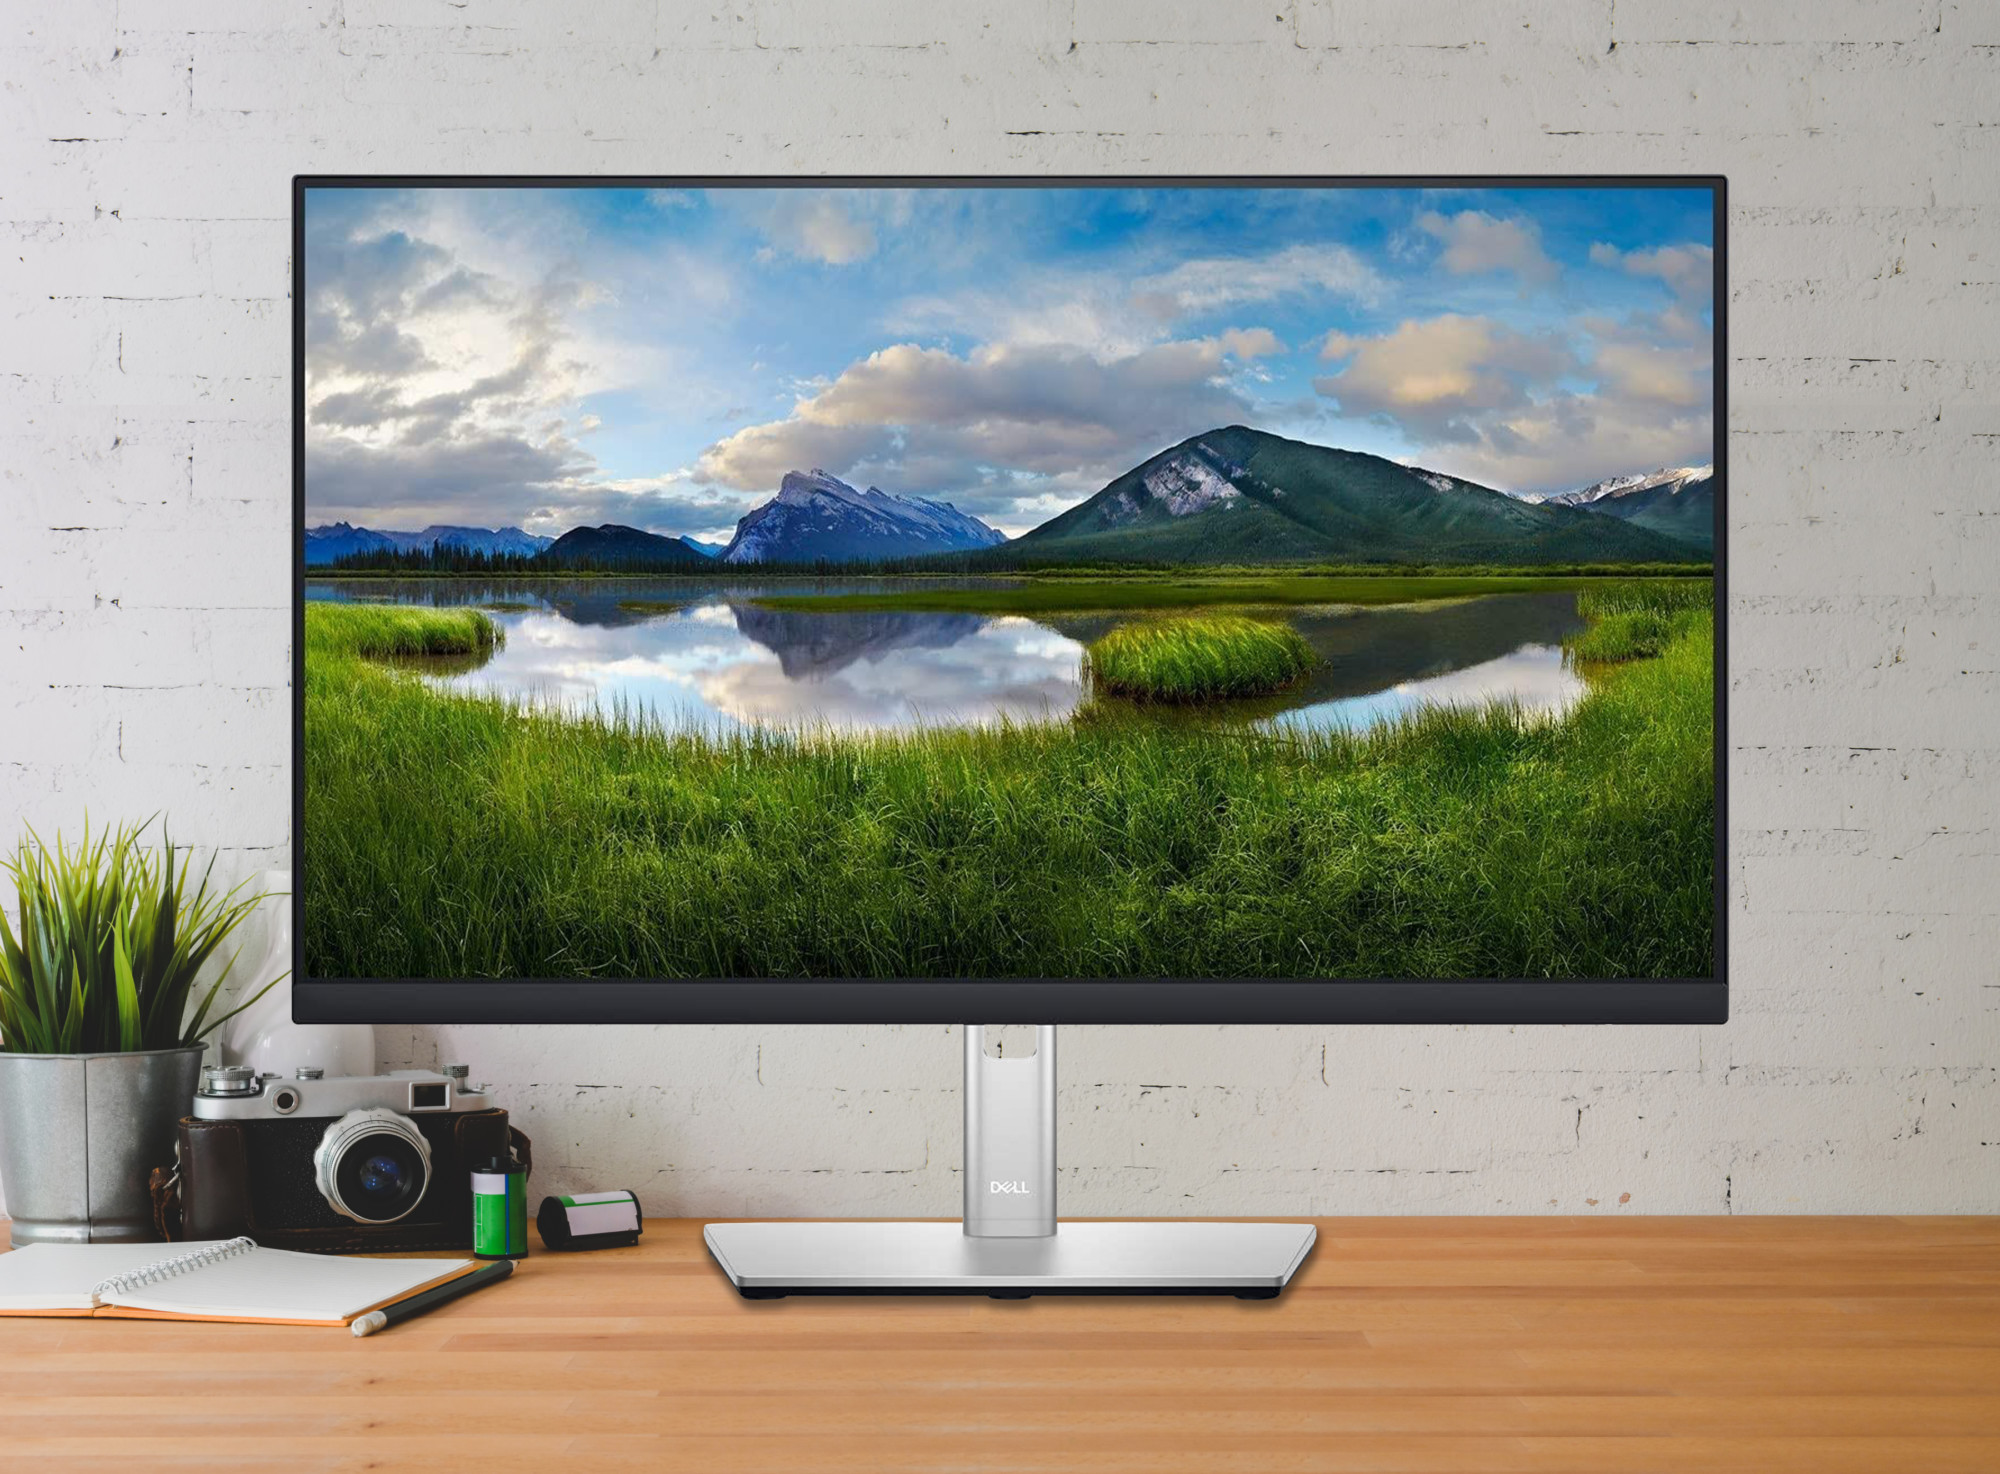 The best computer monitor for a small home office. Dell P2422H Full HD 24″ WLED Monitor. The Dell P2422H 24-inch HD monitor screen is perfect for working through those long days, optimising your eye comfort with a built-in screen that reduces blue light emissions. Don’t compromise on vibrancy, with IPS technology to see vivid colours from all angles.